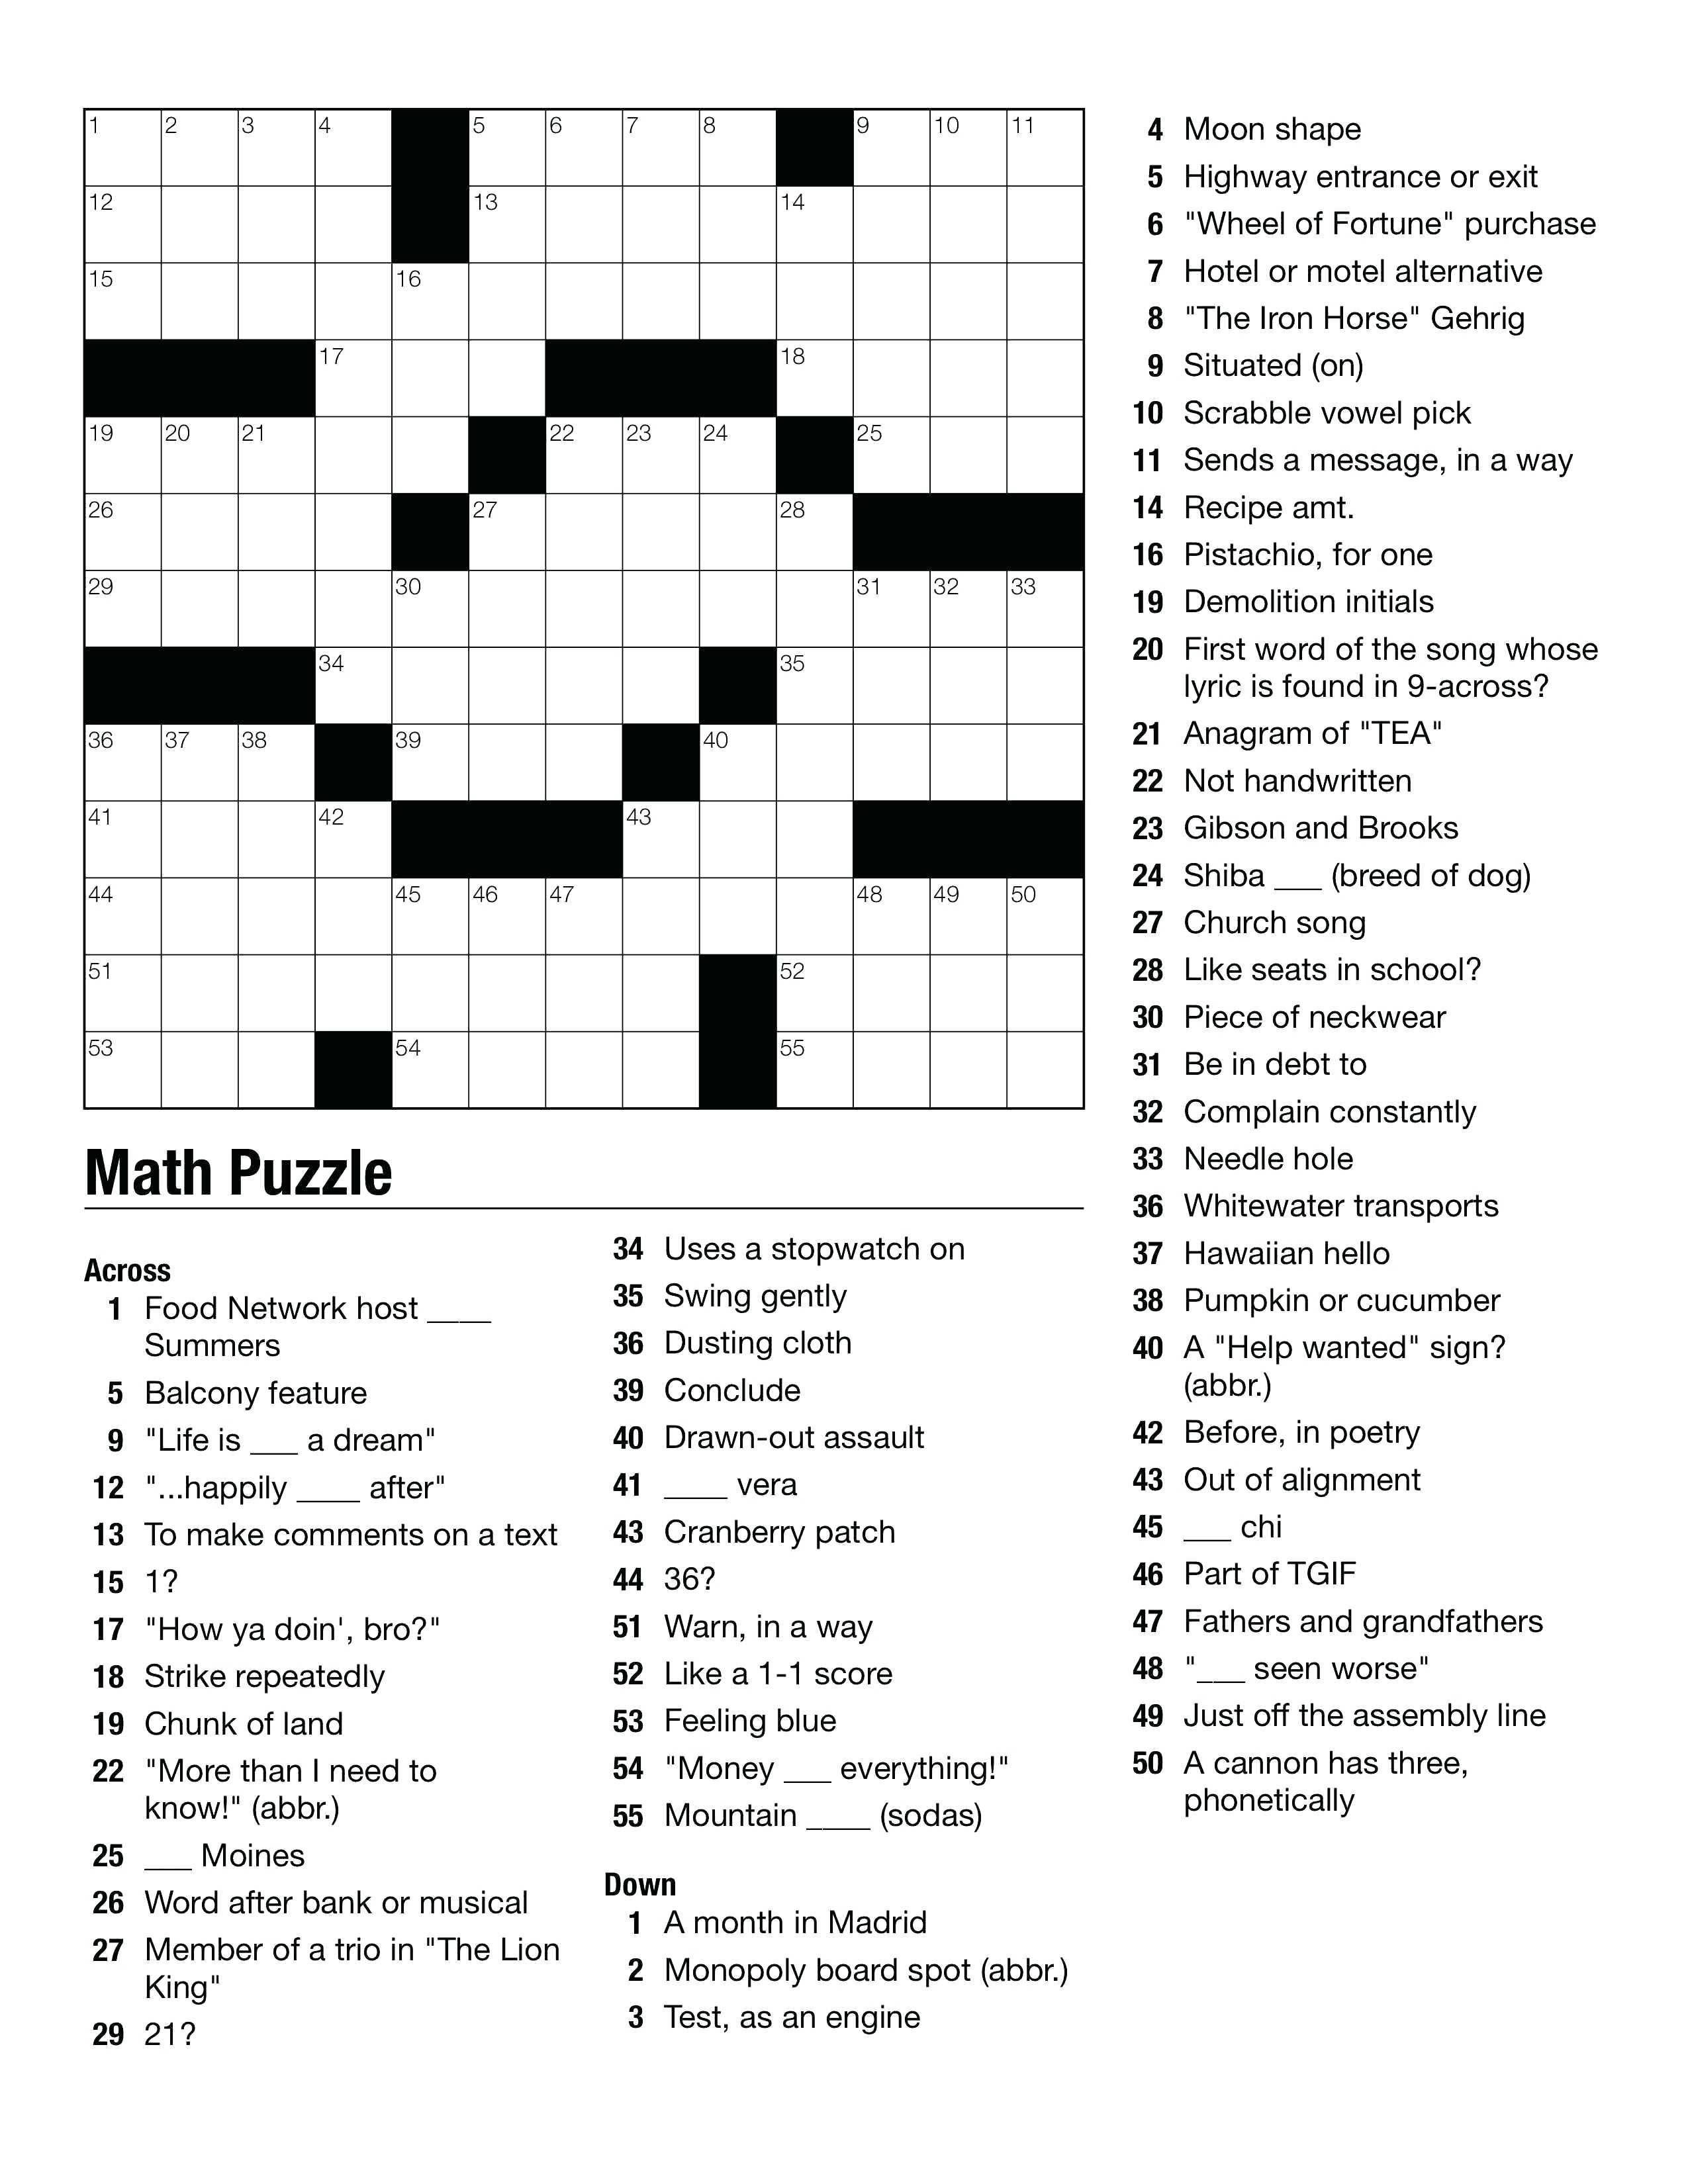 Geometry Puzzles Math Geometry Images Teaching Ideas On Crossword - Printable Puzzles For High School